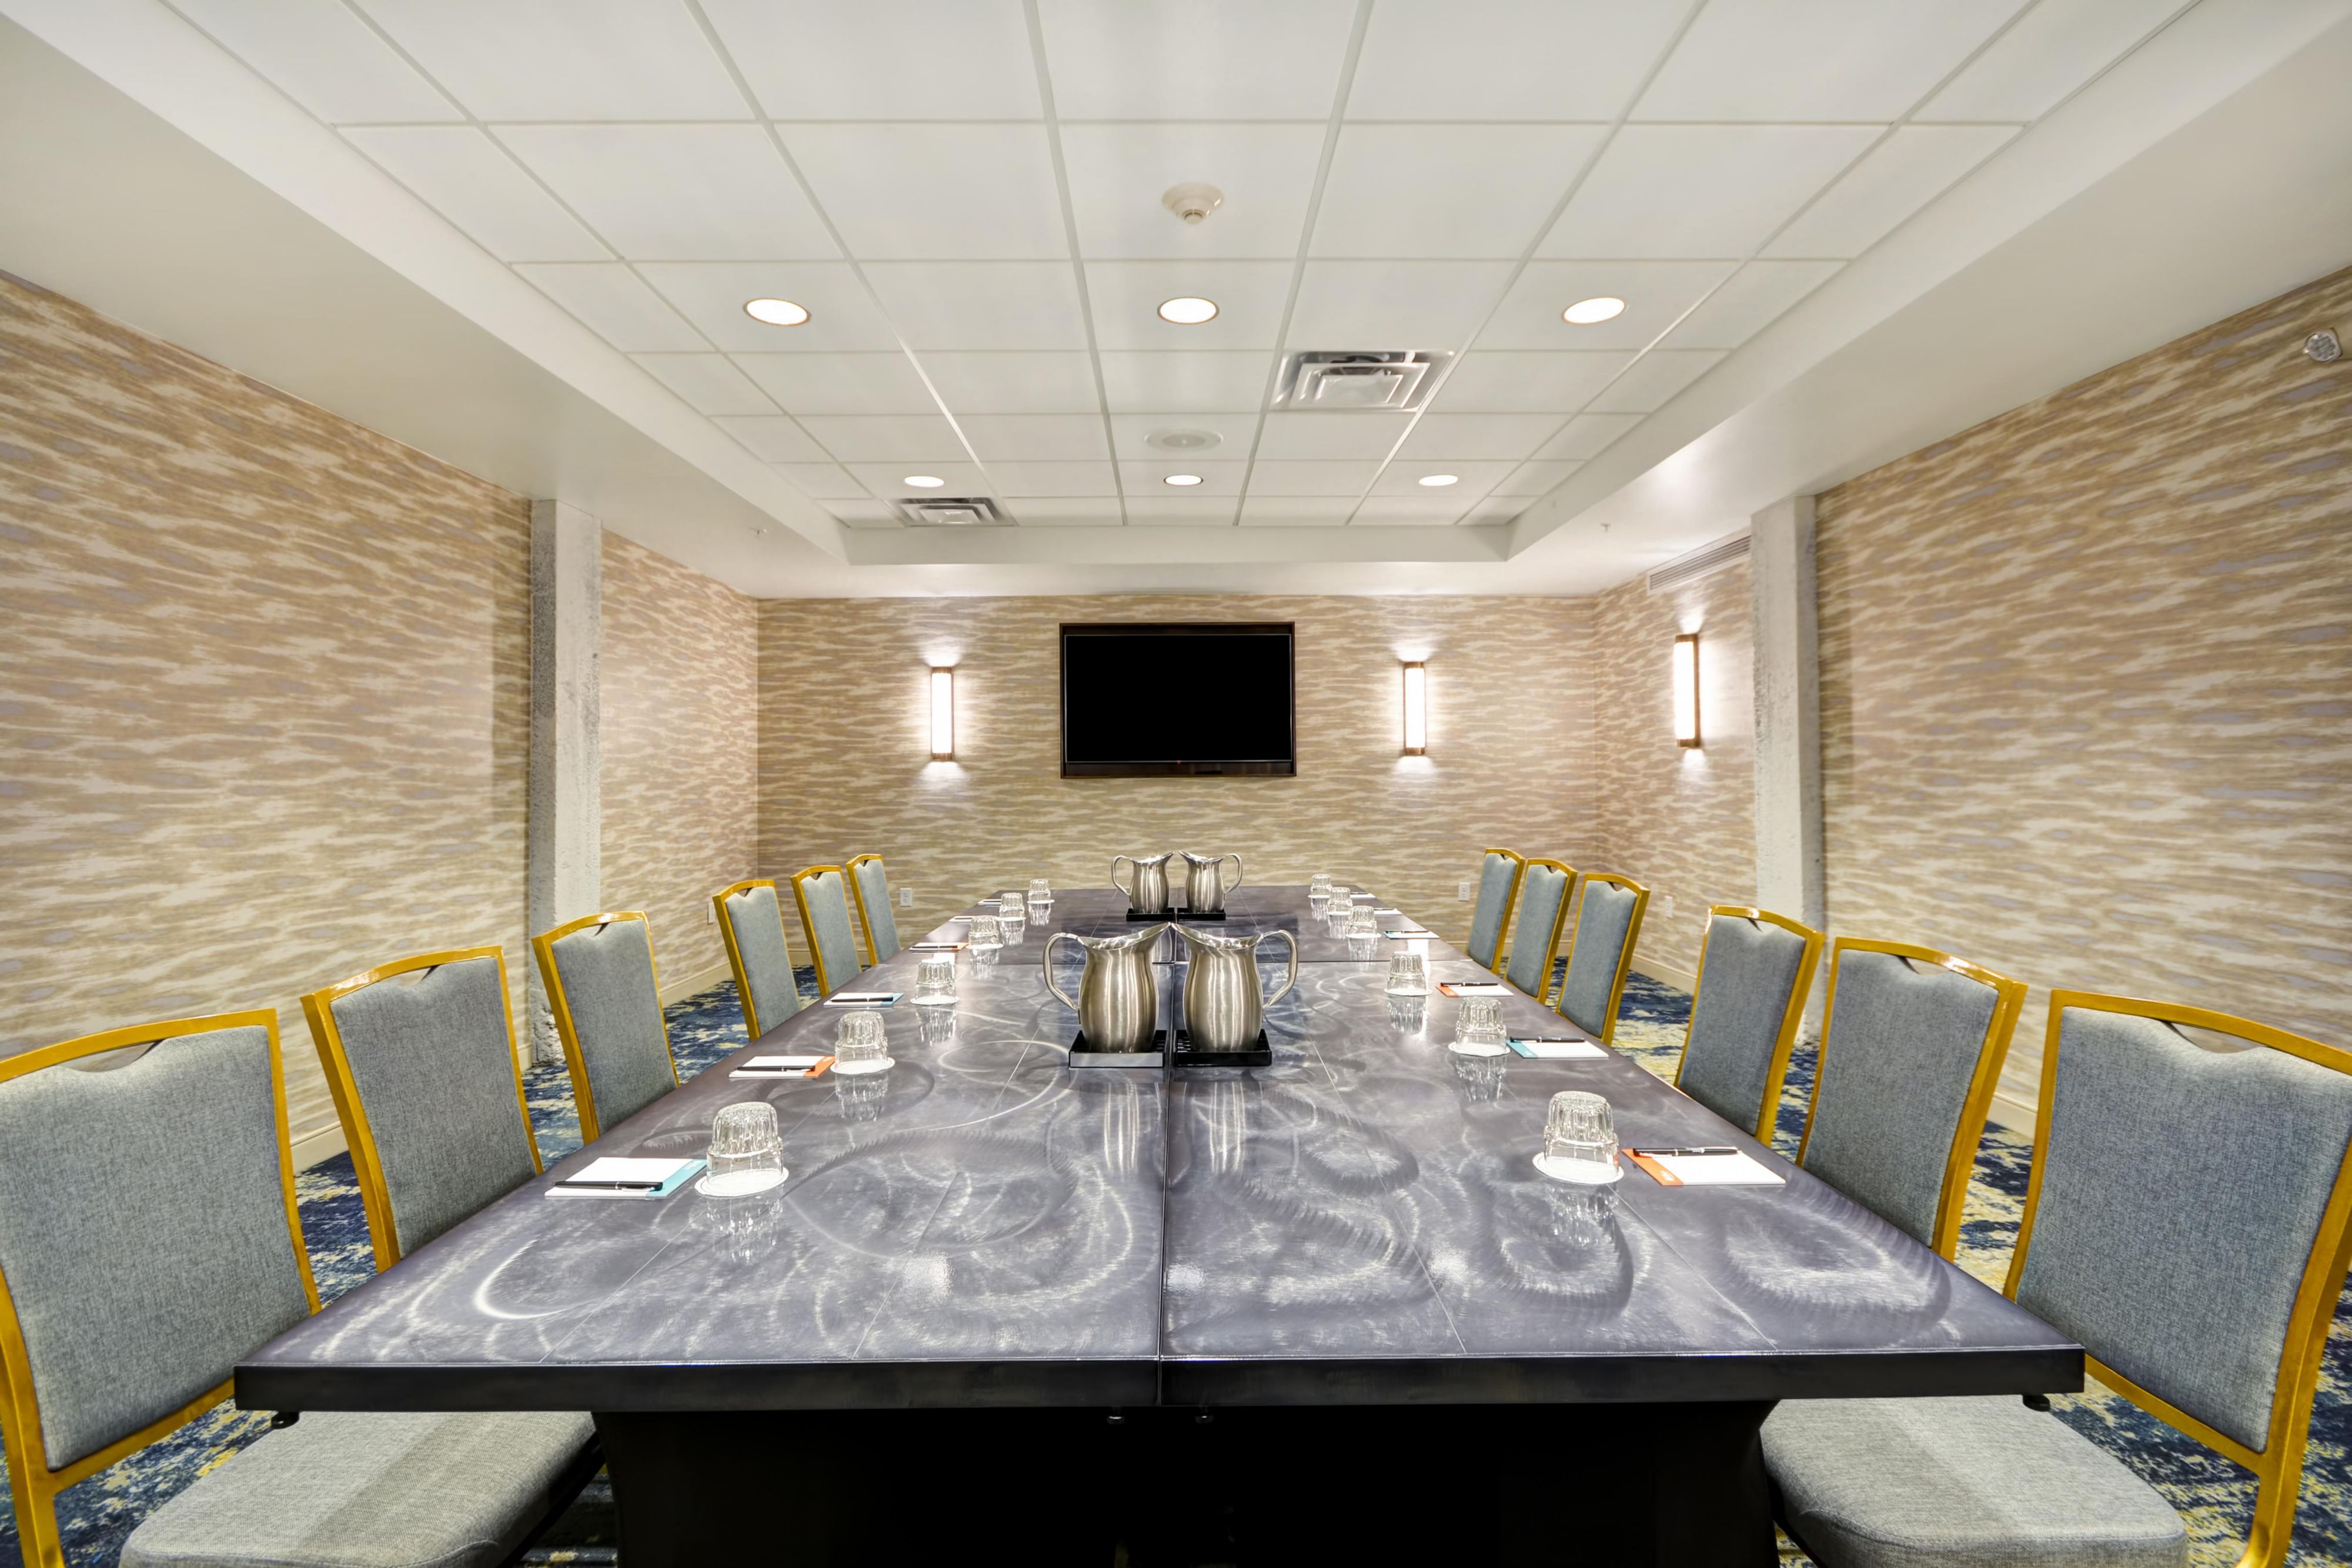 Looking for the perfect location for your next meeting or gathering? Please email us for discounted rates and mention 'Messenger Coffee' to receive a complimentary gallon of coffee. 